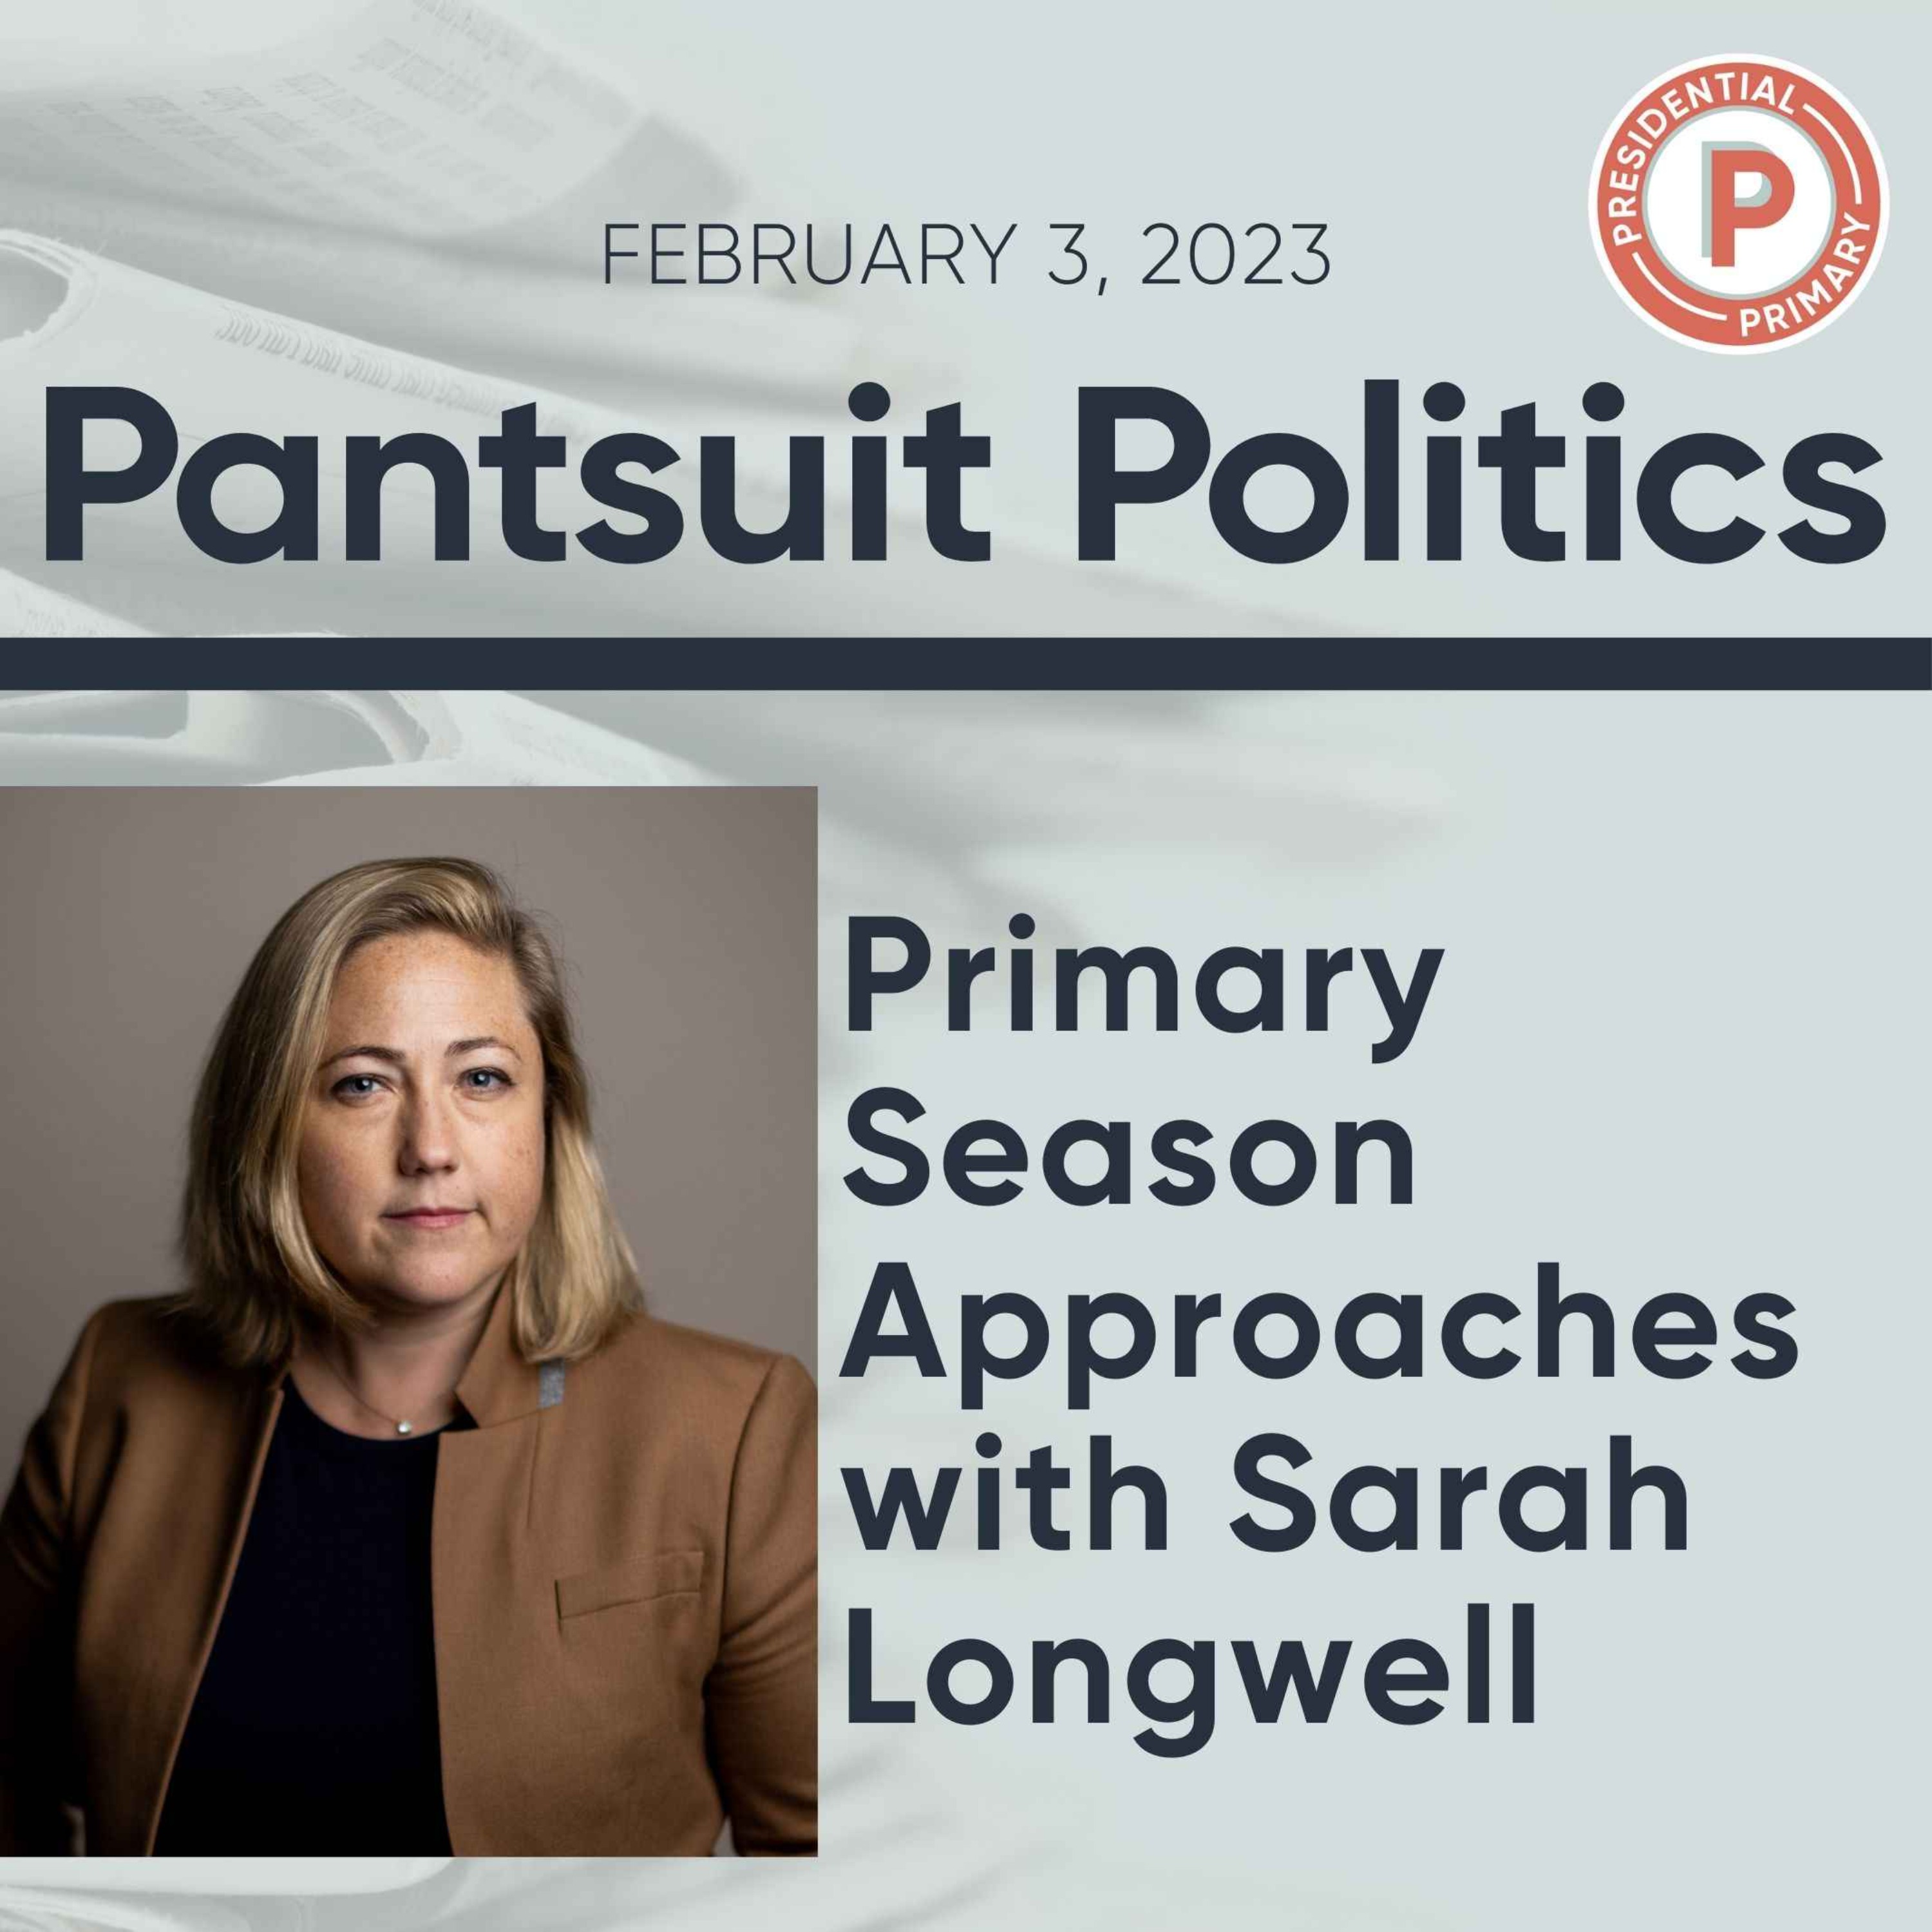 Primary Season Approaches with Sarah Longwell